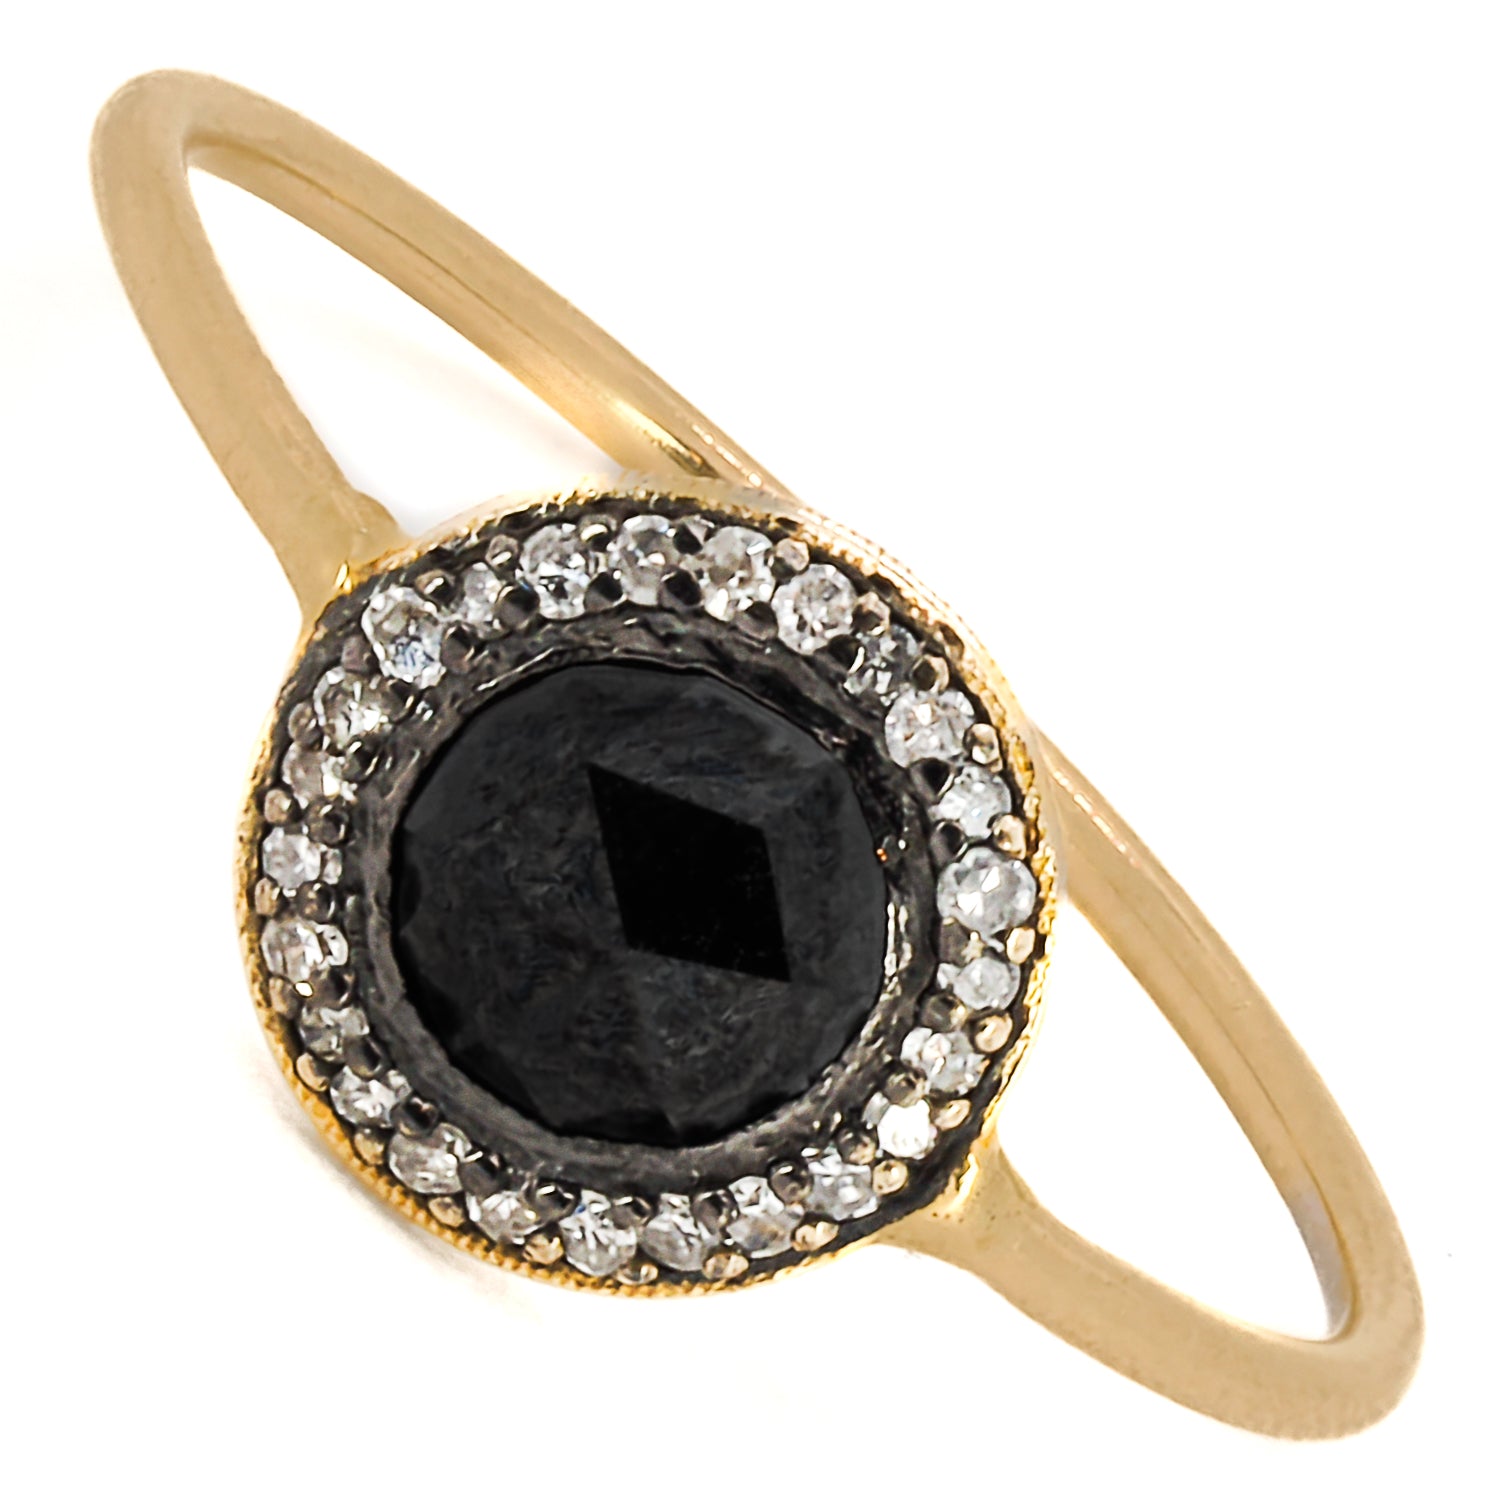 Handmade black diamond ring with 14k gold setting, perfect for any occasion.